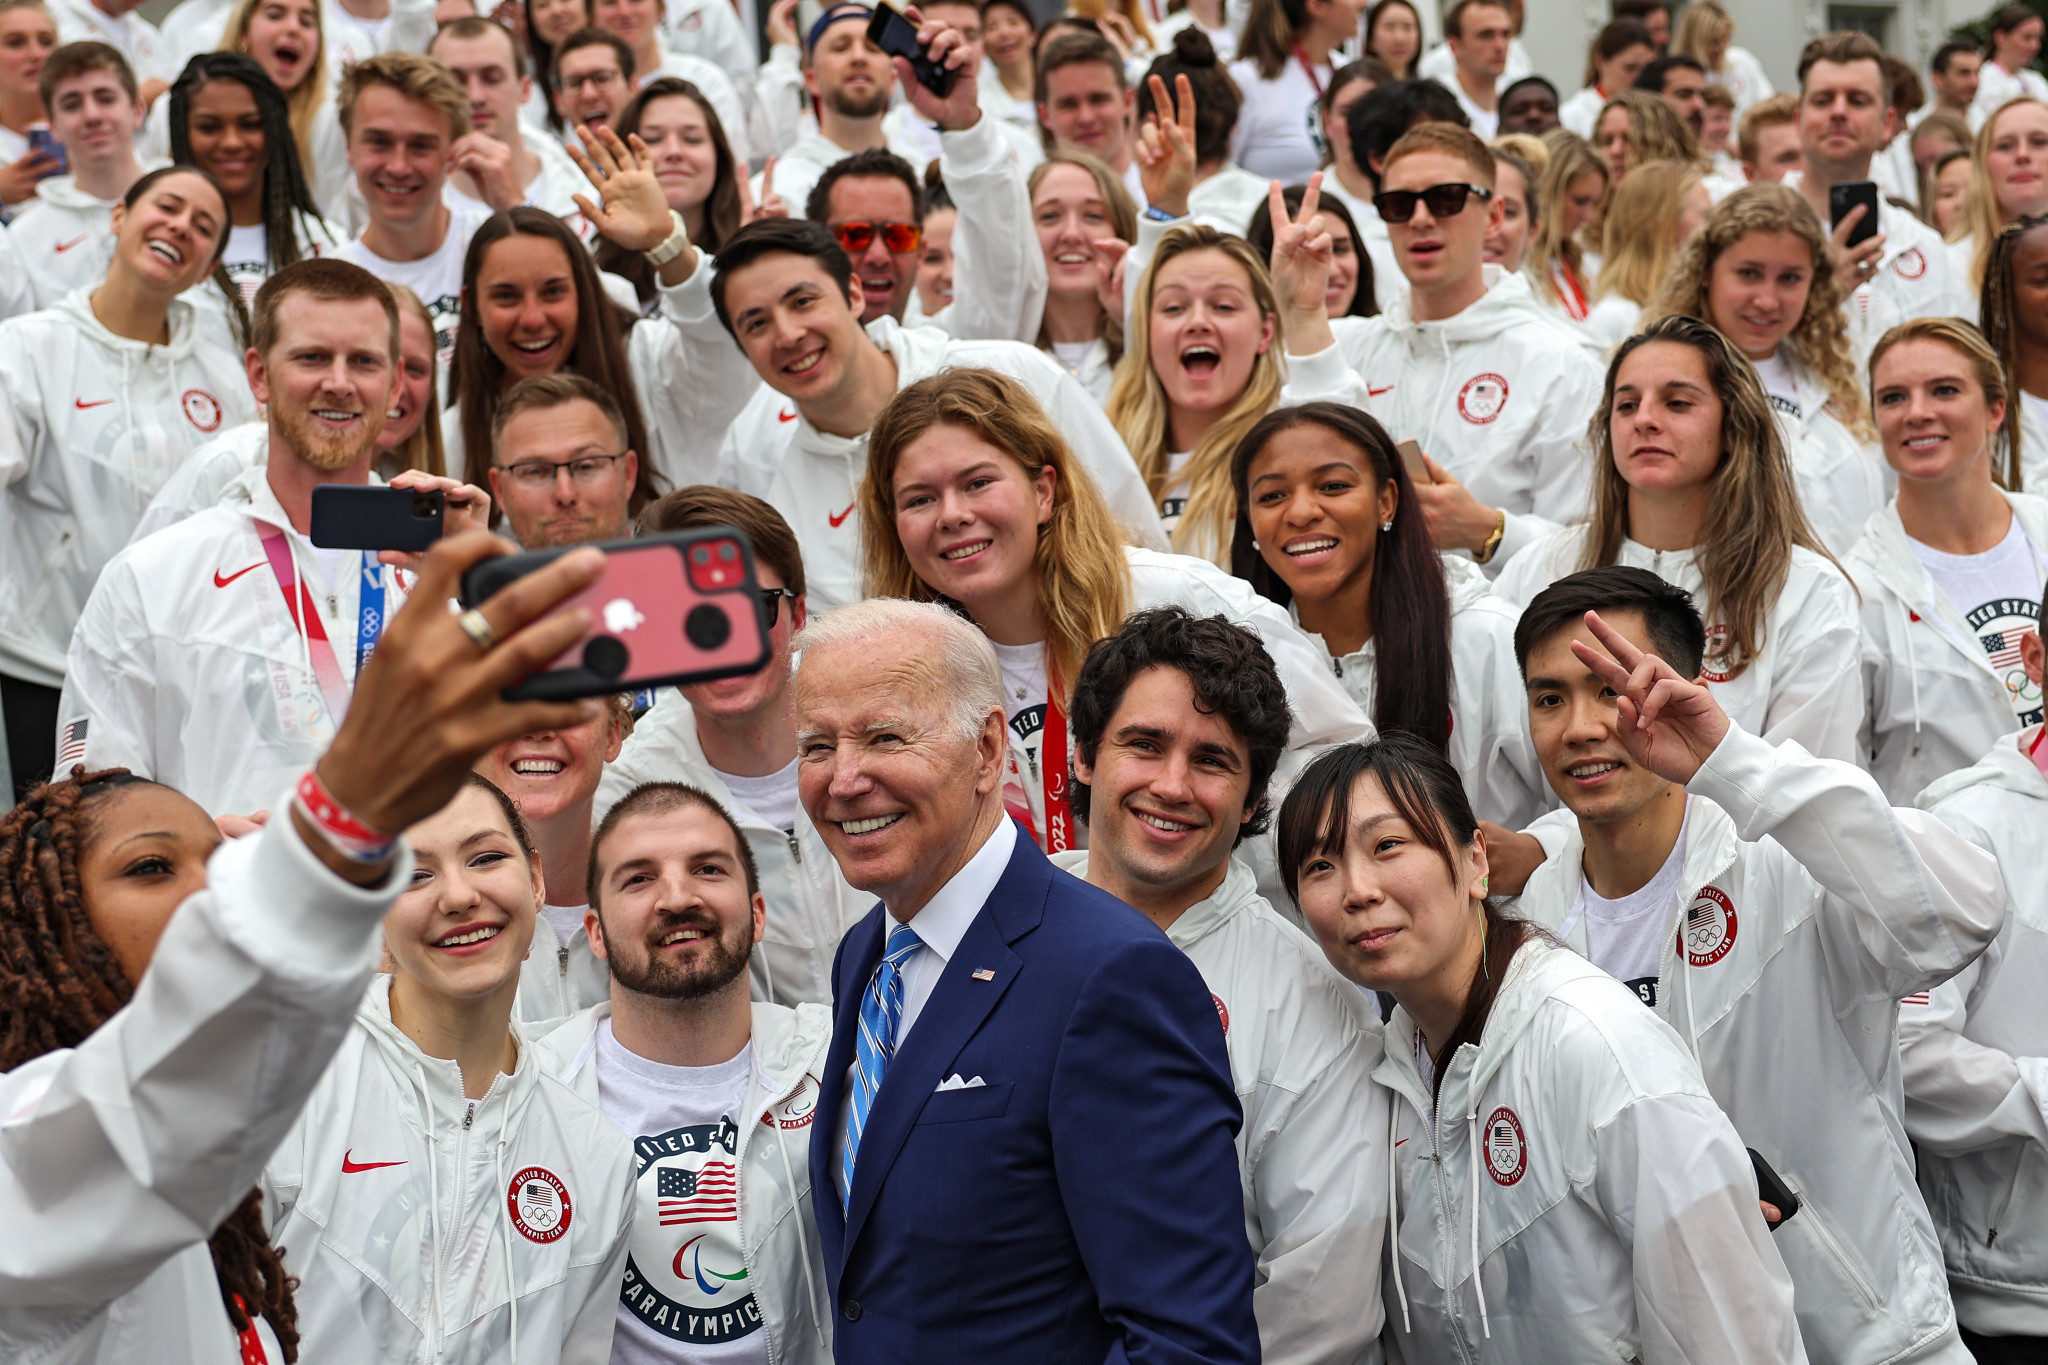 Biden hails US Olympic teams for unifying "divided" nation at White House ceremony